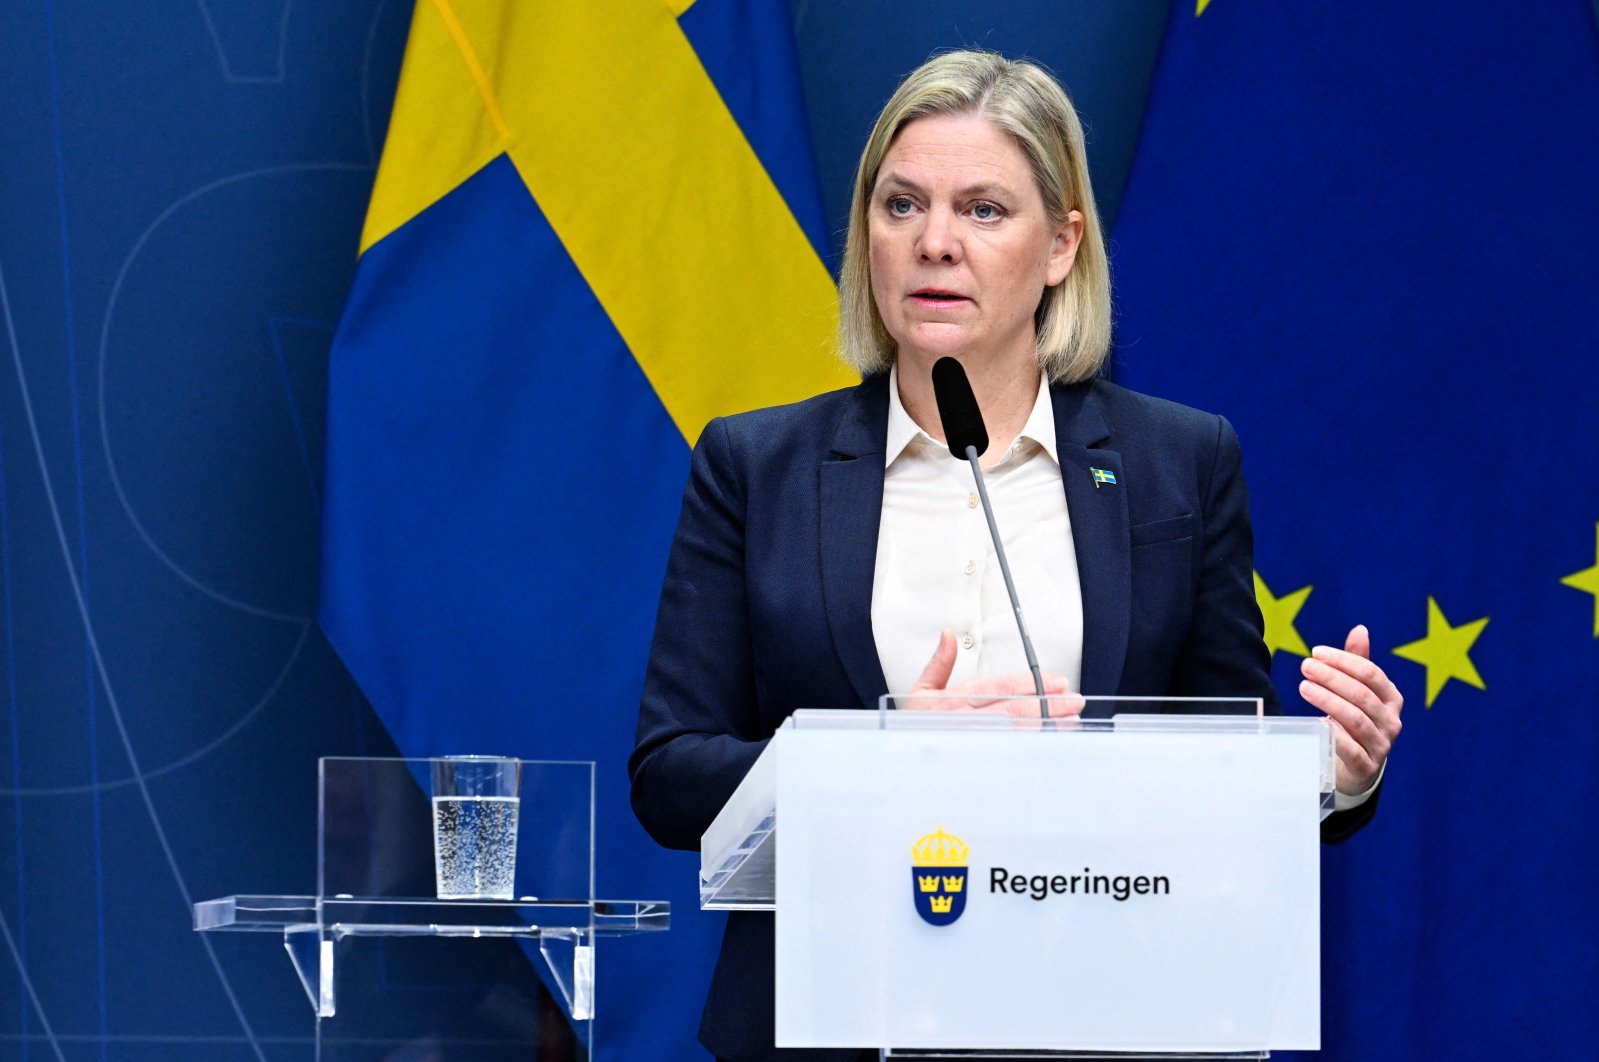 Swedish Prime Minister Magdalena Andersson conducts a press conference on the security situation in Europe, at Rosenbad in Stockholm, Sweden, Feb. 27, 2022. (AFP Photo)